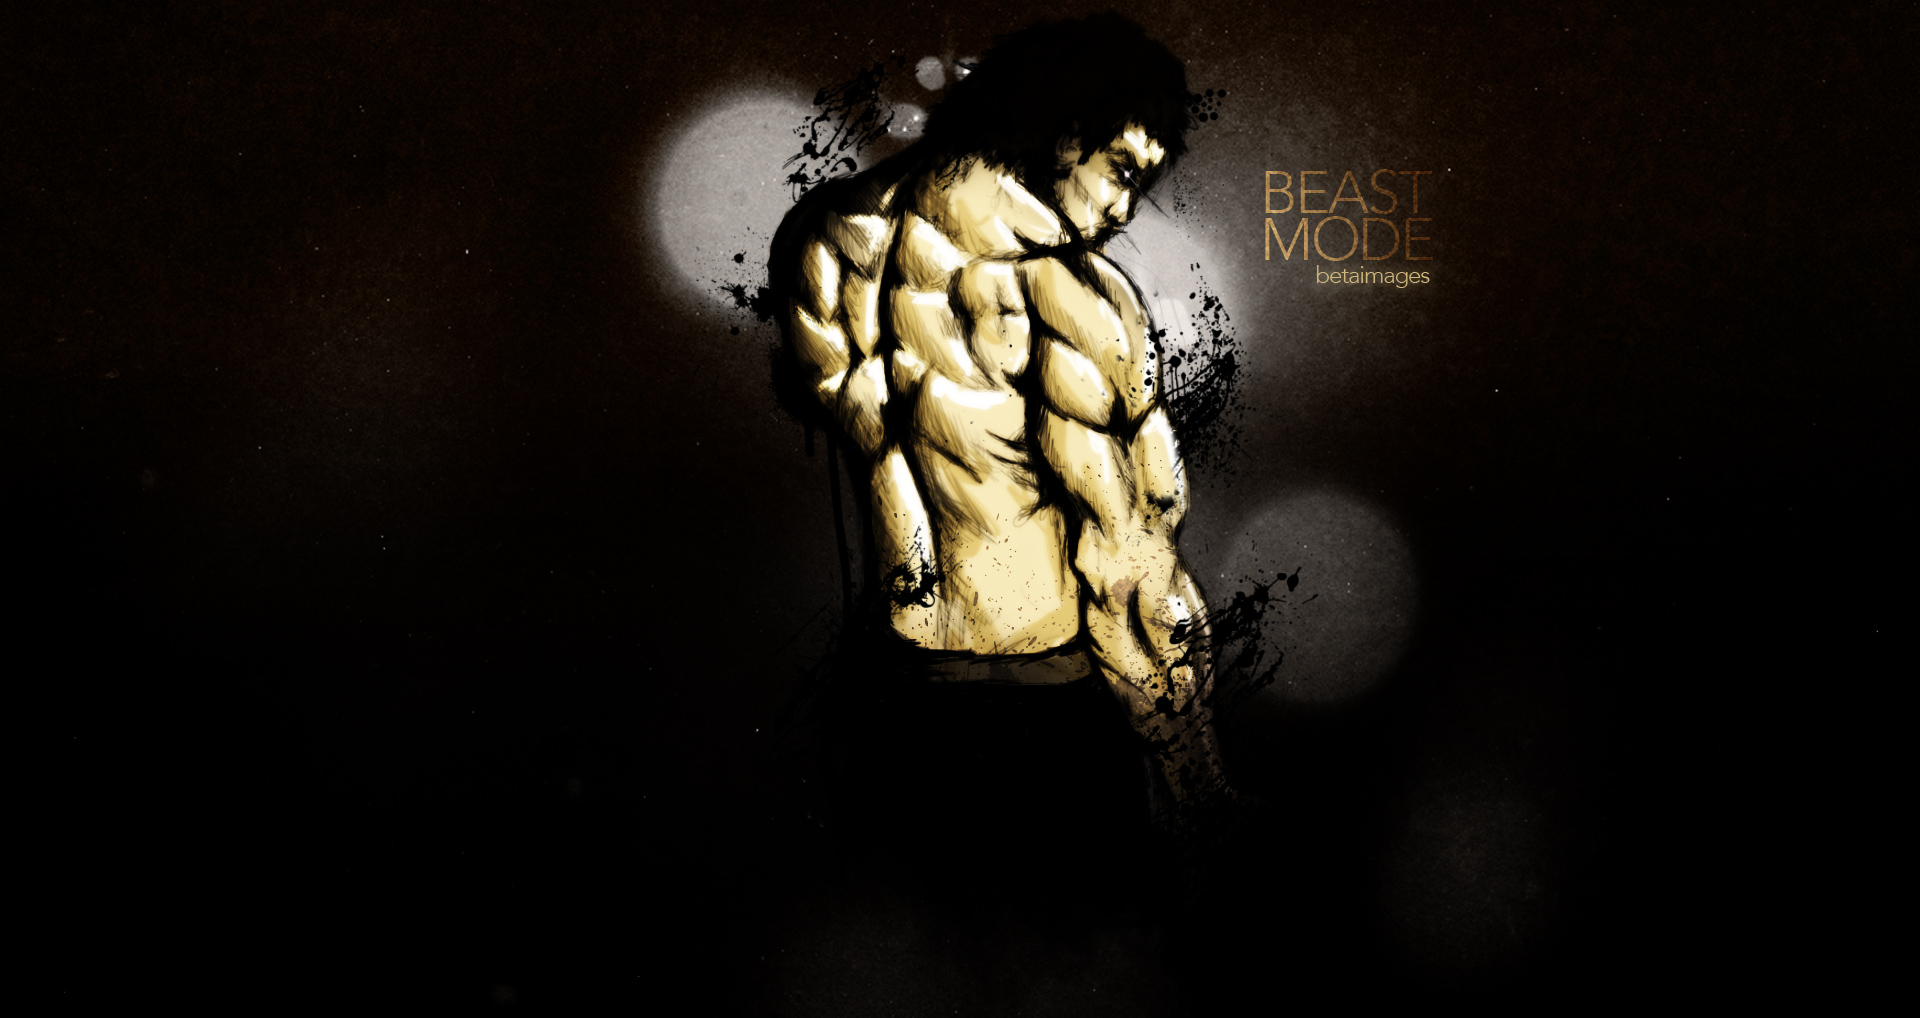 Wallpapers Gym Beast Mode Sketch Beta Images Creative Design ...